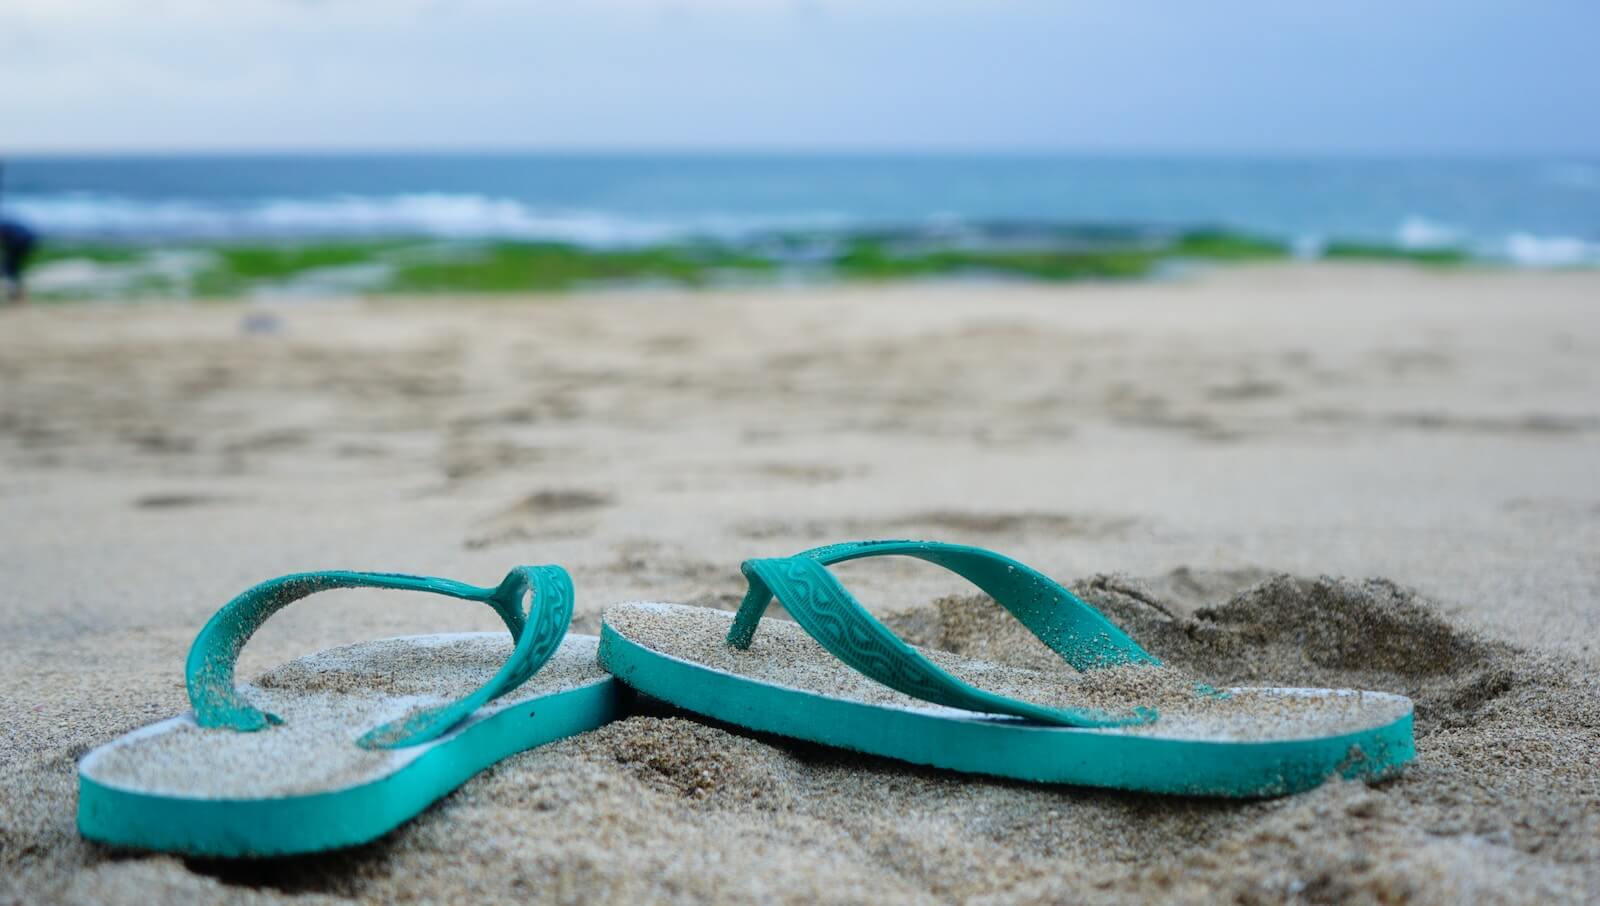 Best Women's Flip Flops: Top 5 Sandals Most Recommended By Experts